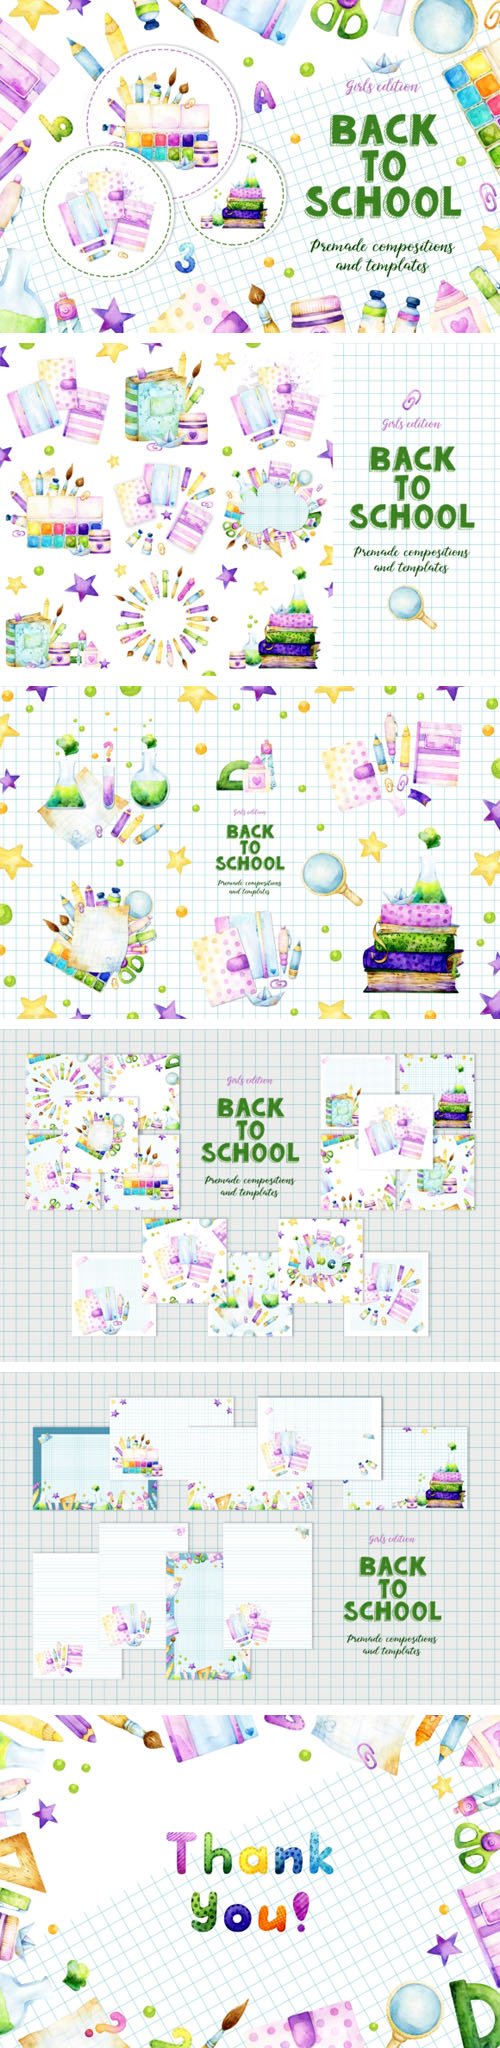 Back to School - Premade Compositions & Templates